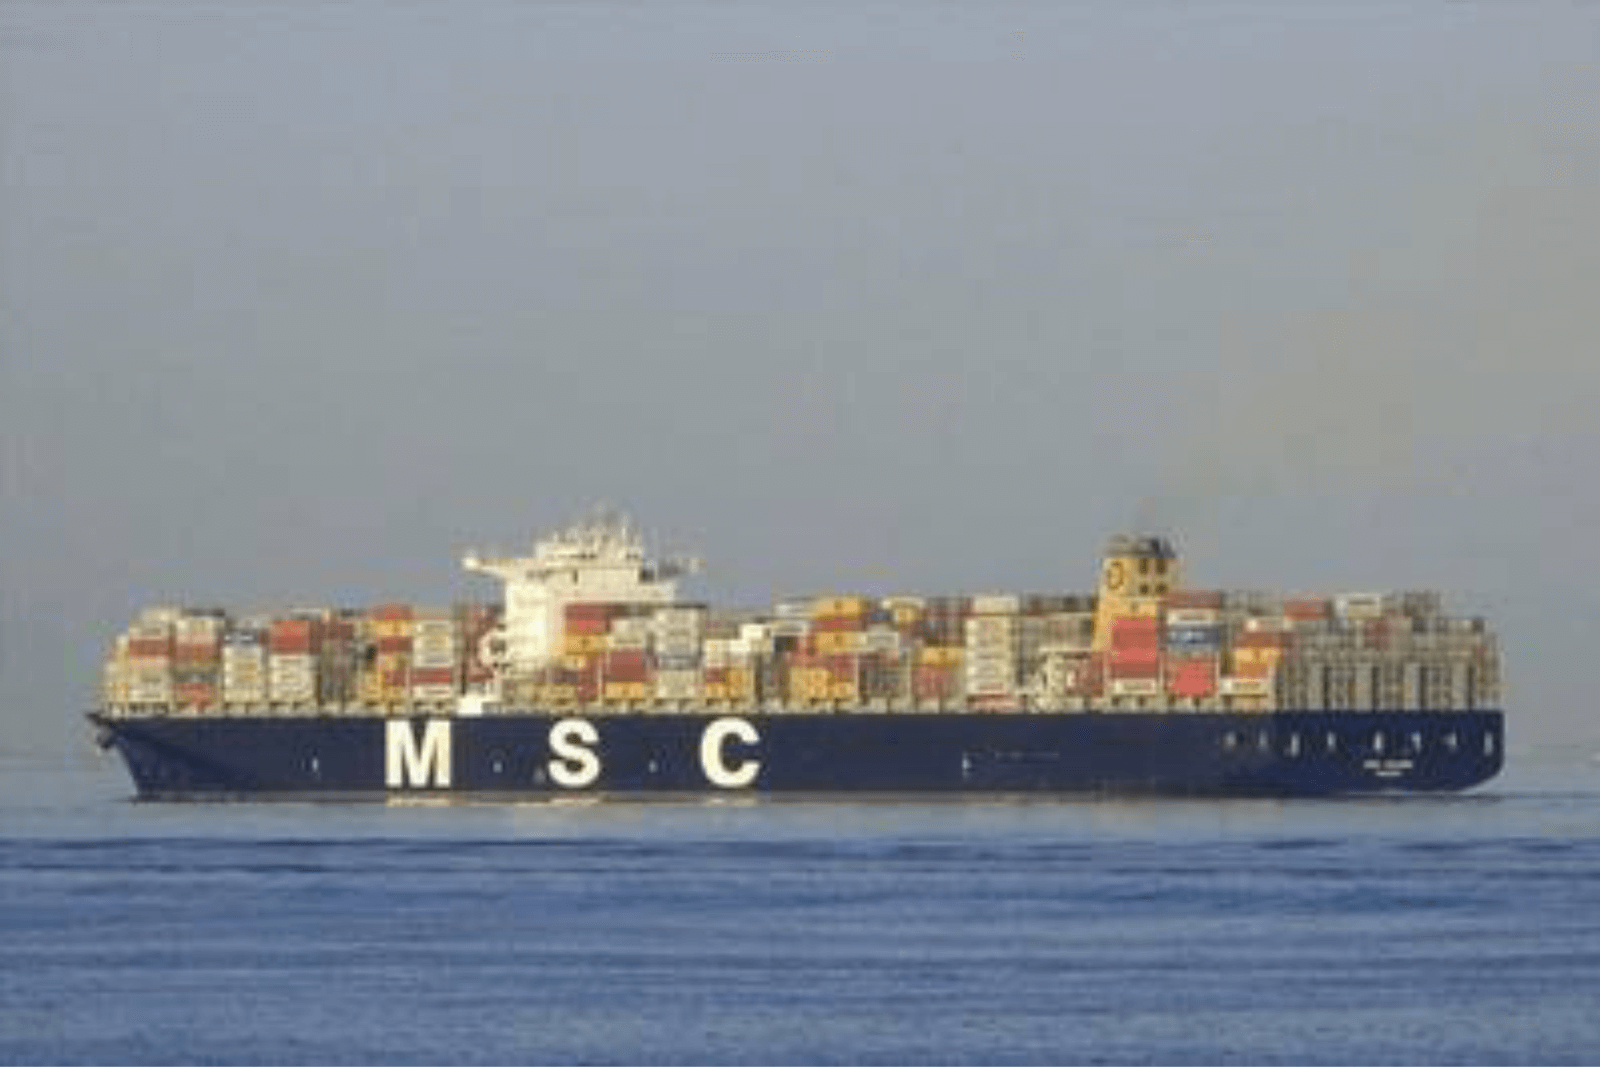 Bad Fuel Causes Engine Trouble on MSC Containership